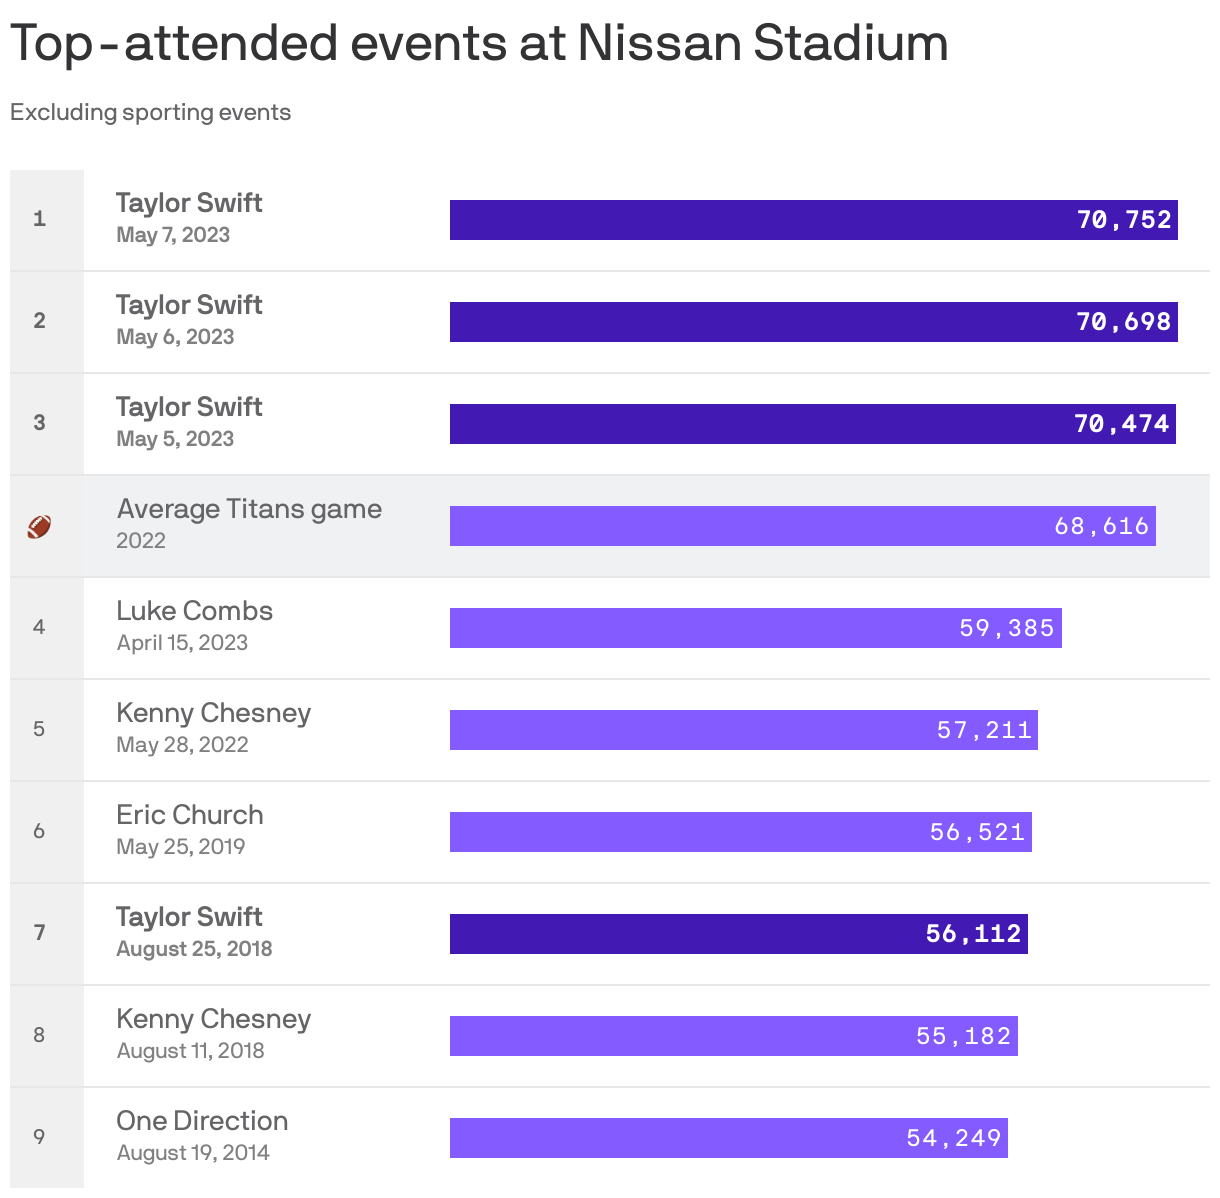 Top-attended events at Nissan Stadium